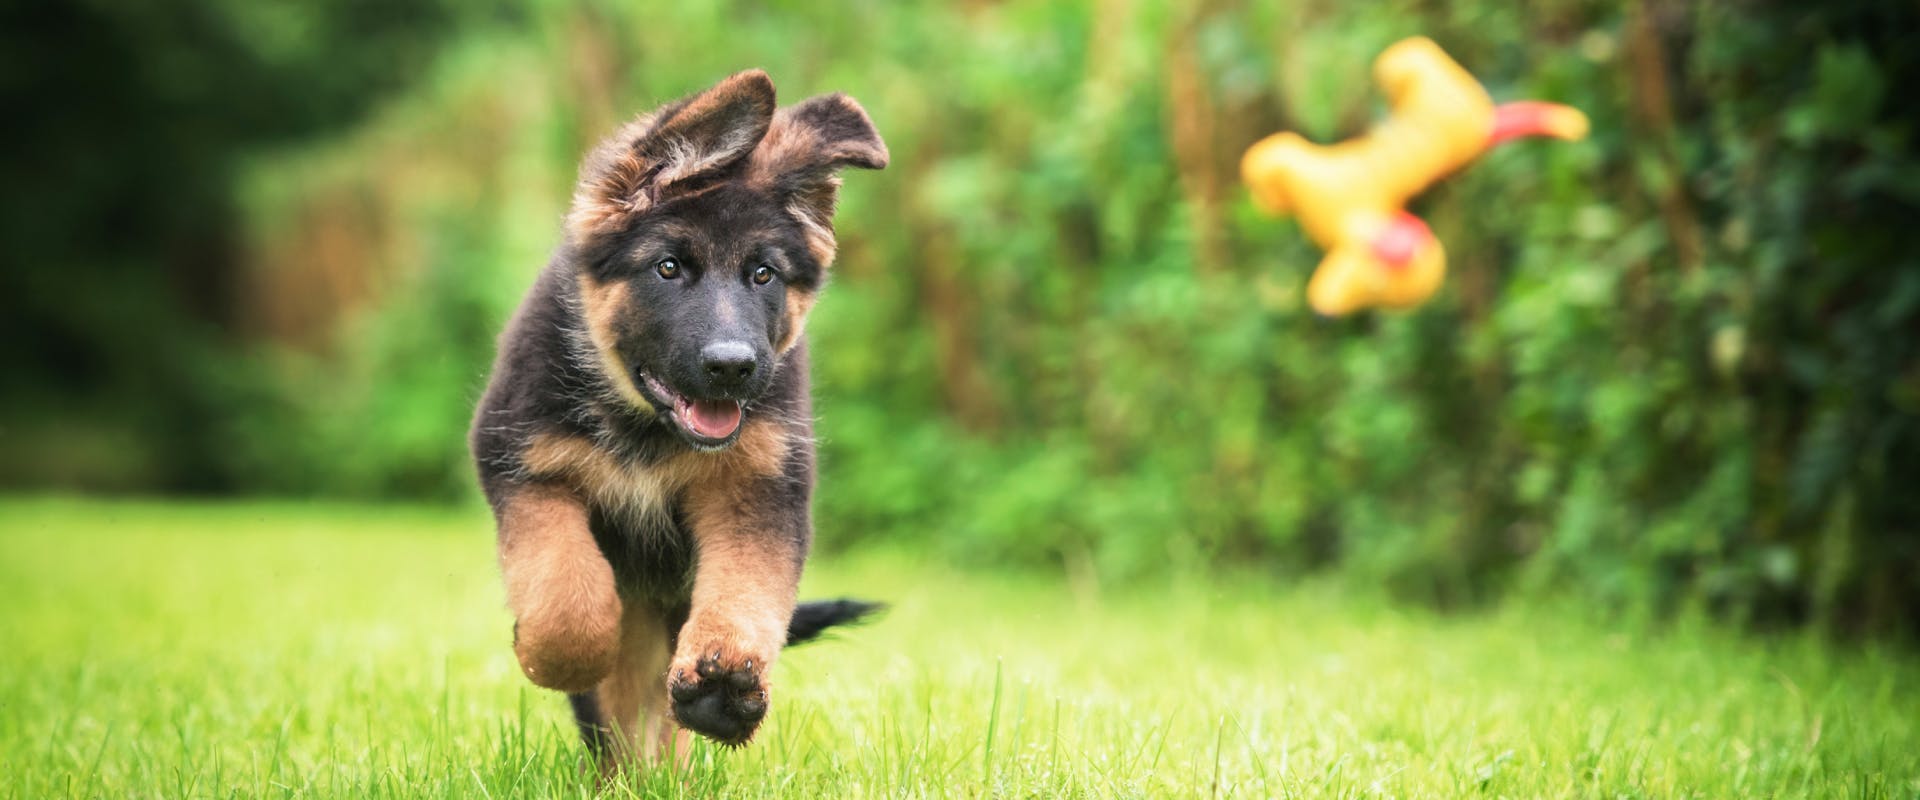 a German shepherd puppy running to try and catch a yellow squeaky toy falling on to the grass